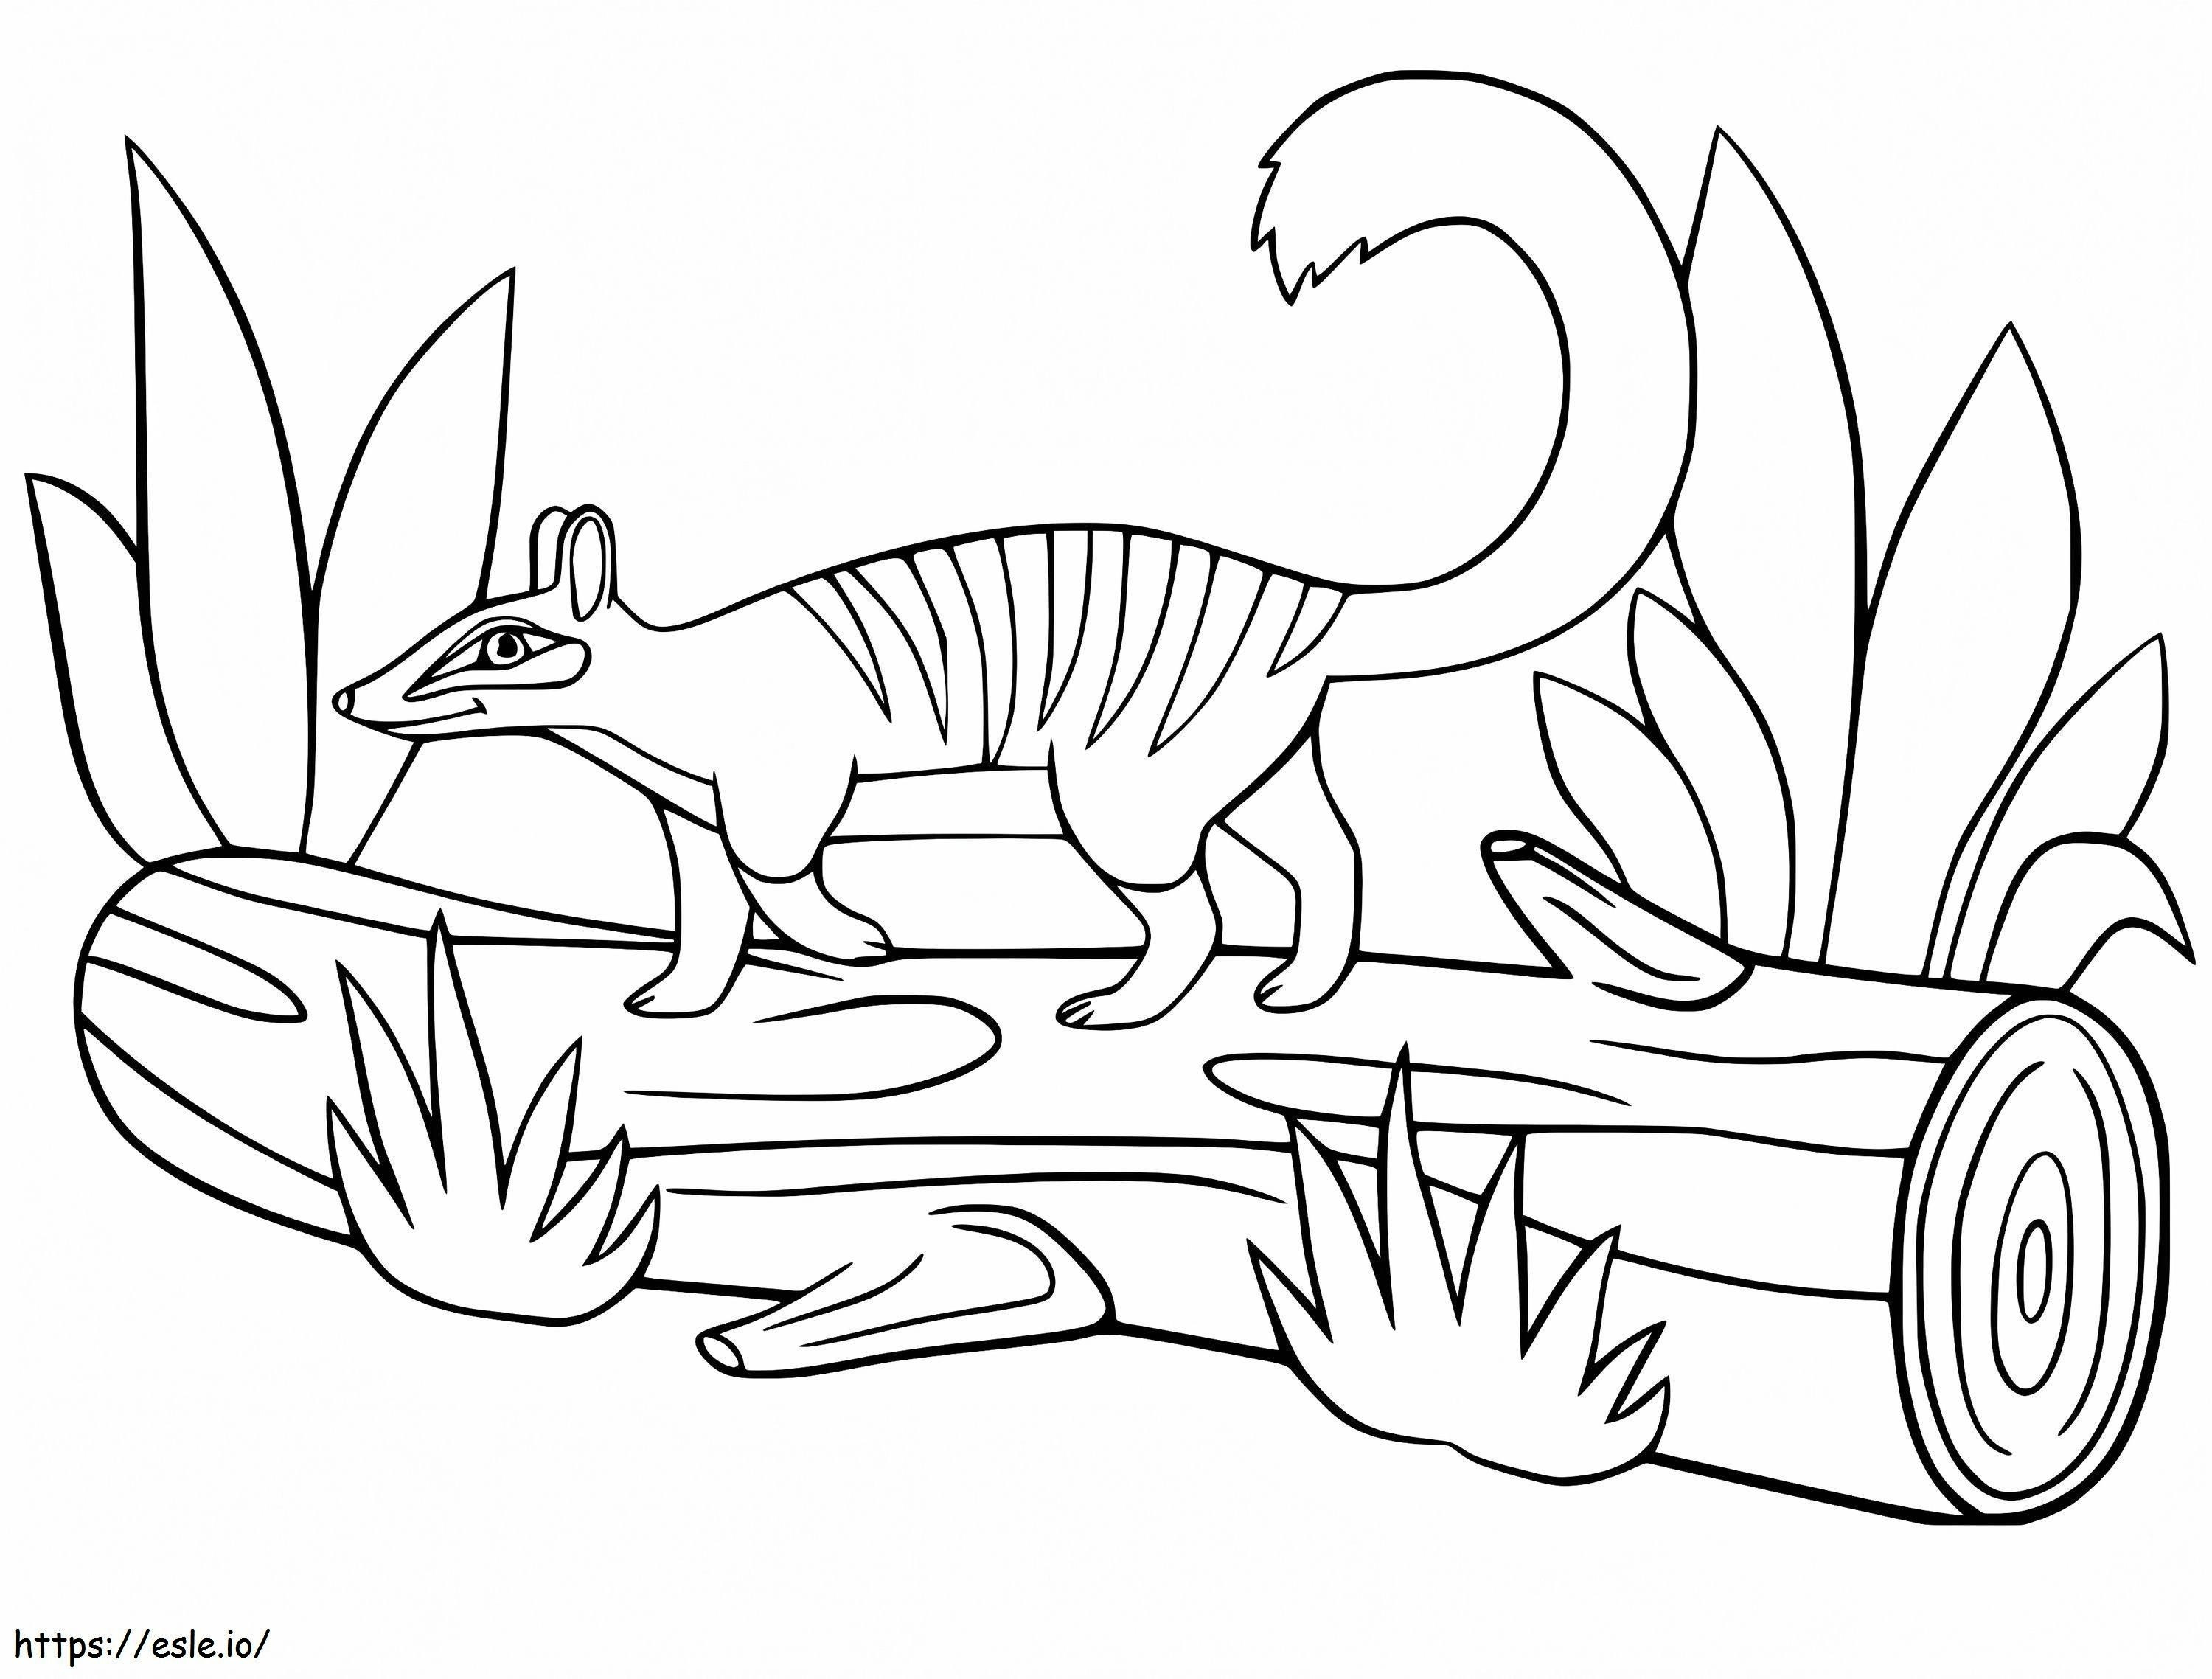 Number 1 coloring page